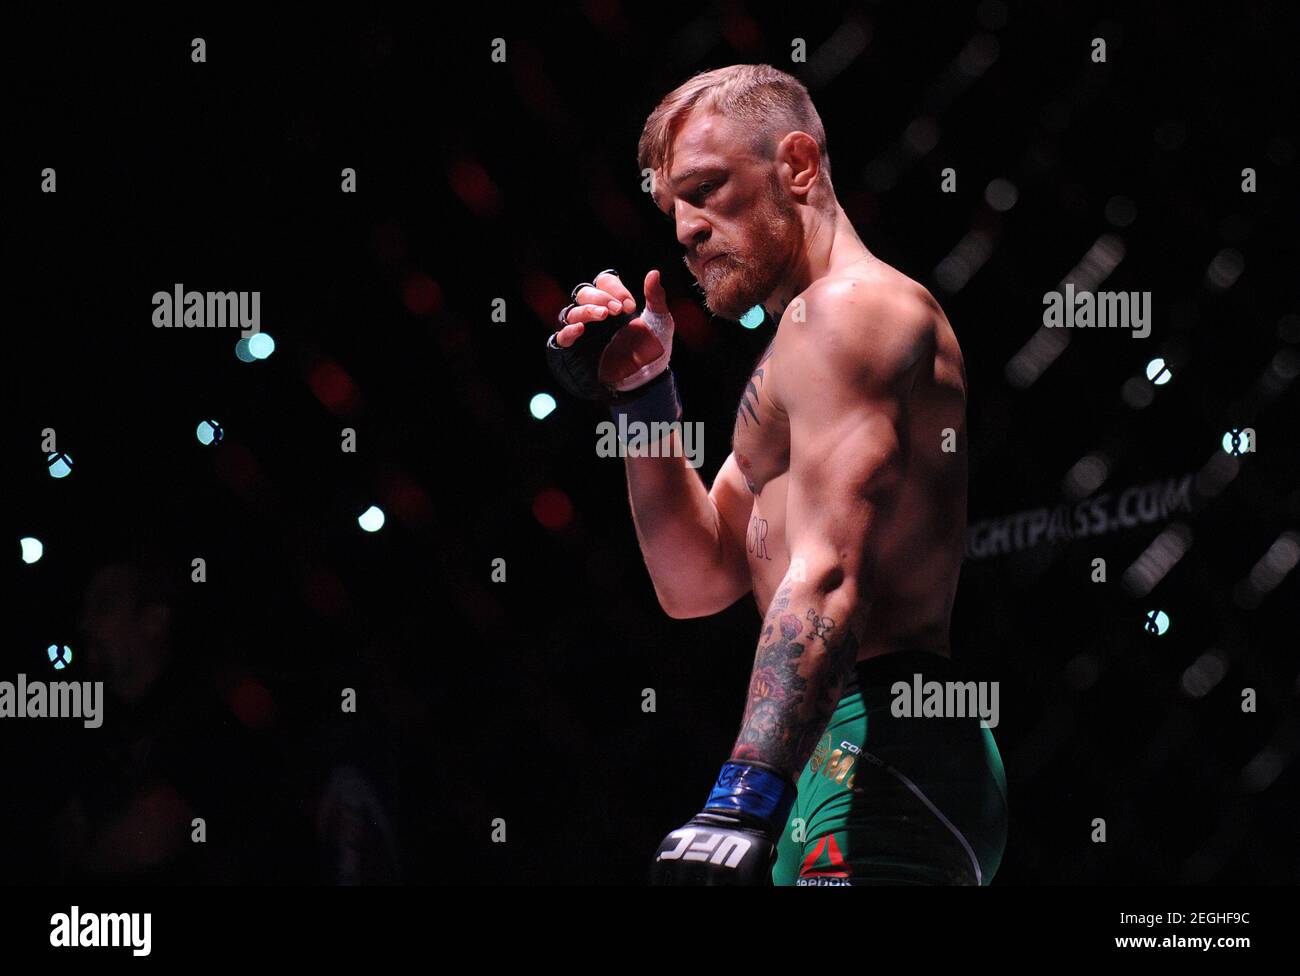 December 2015; Las Vegas, NV, USA; Conor McGregor before fighting against Jose Aldo during UFC 194 at MGM Grand Garden Arena. Mandatory Gary A. Vasquez-USA TODAY Sports / Reuters Picture